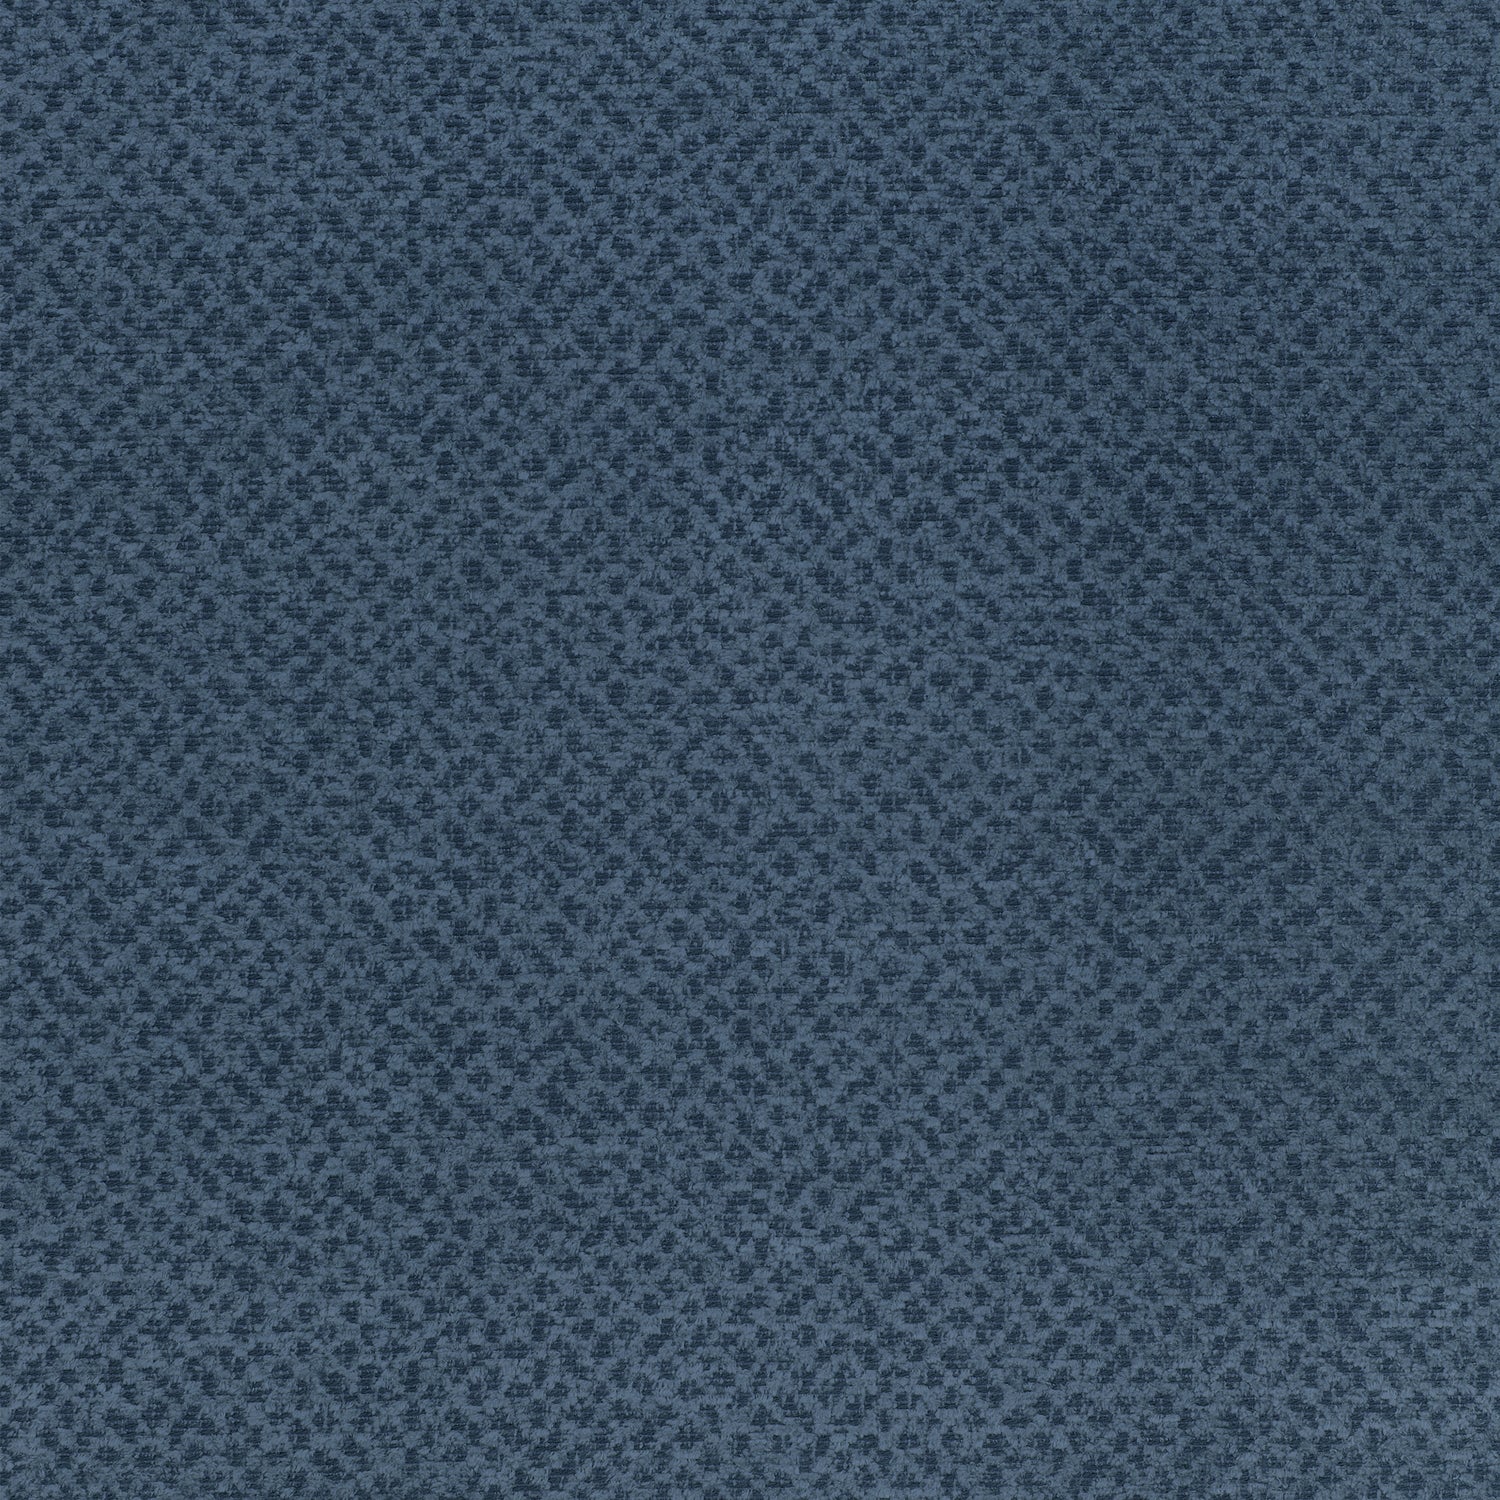 Gryffin fabric in navy color - pattern number W80413 - by Thibaut in the Mosaic collection